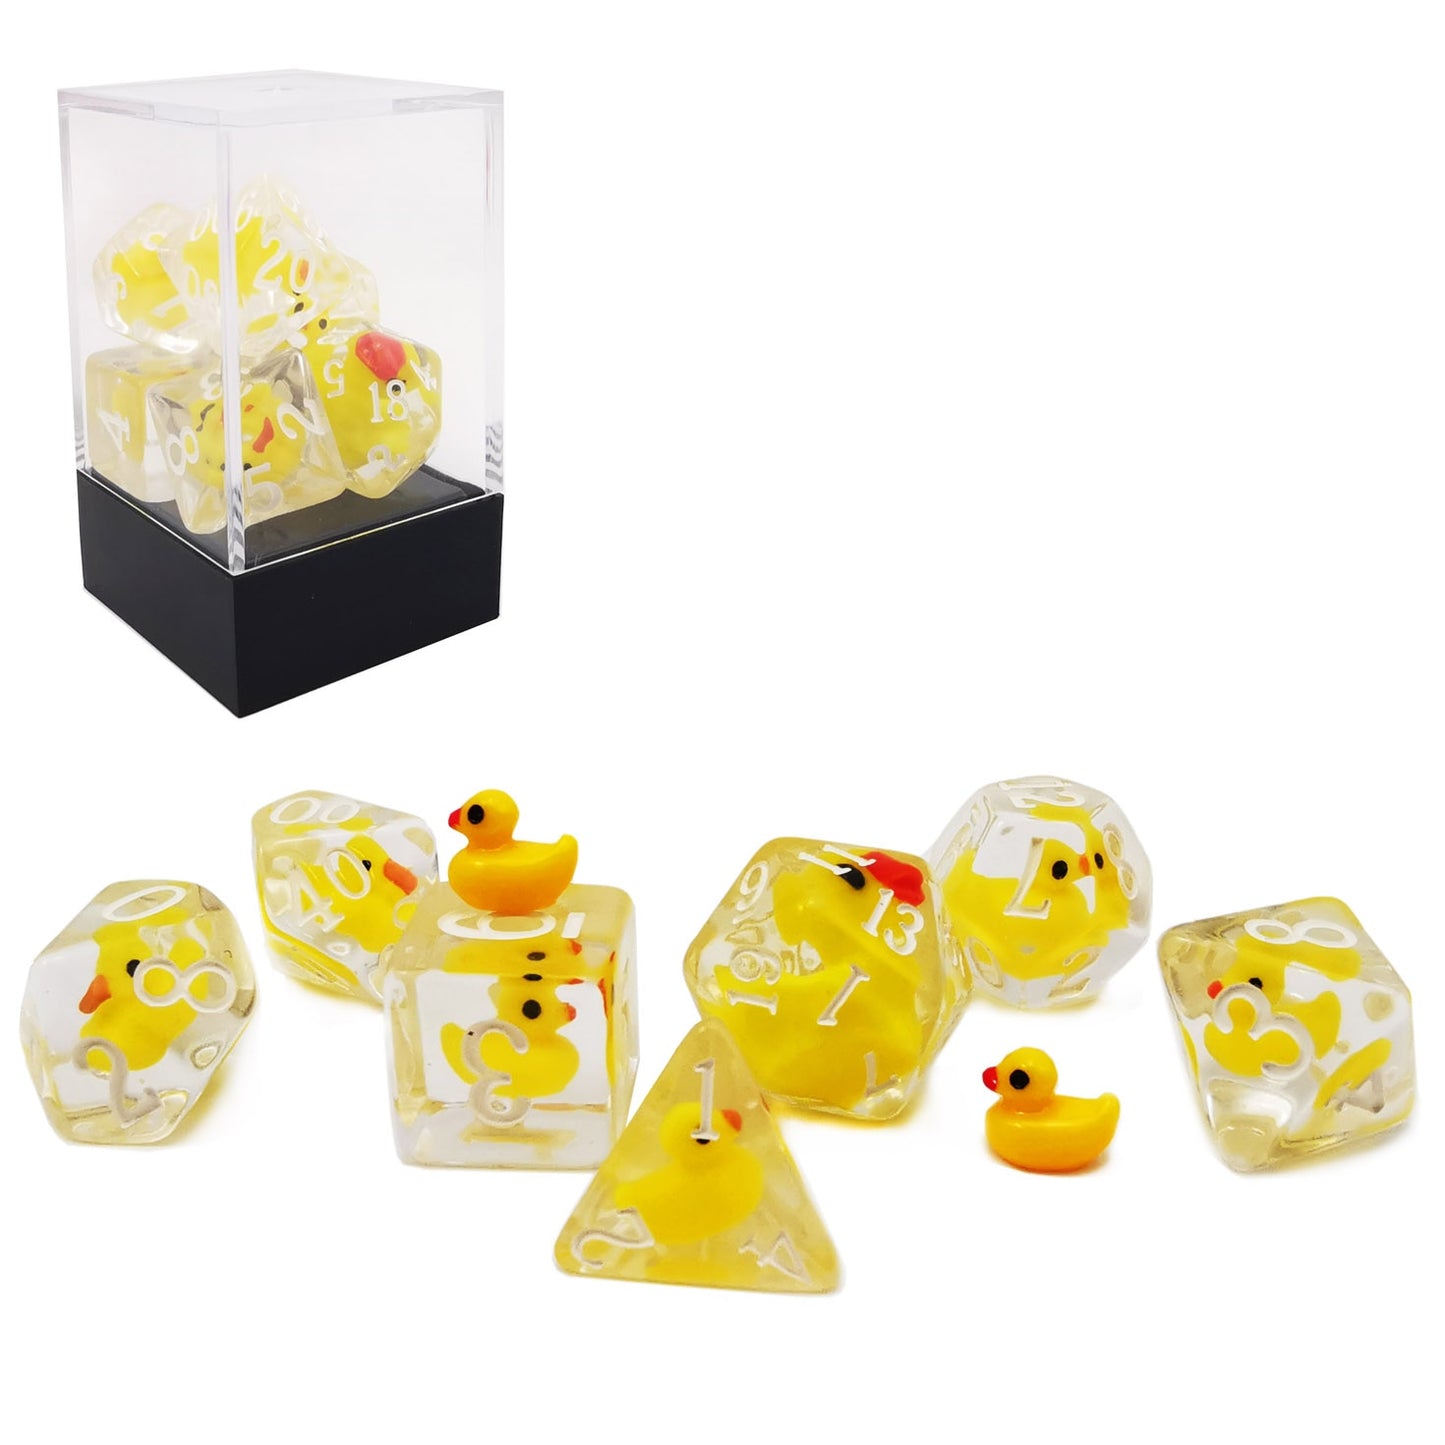 The Duckling Set